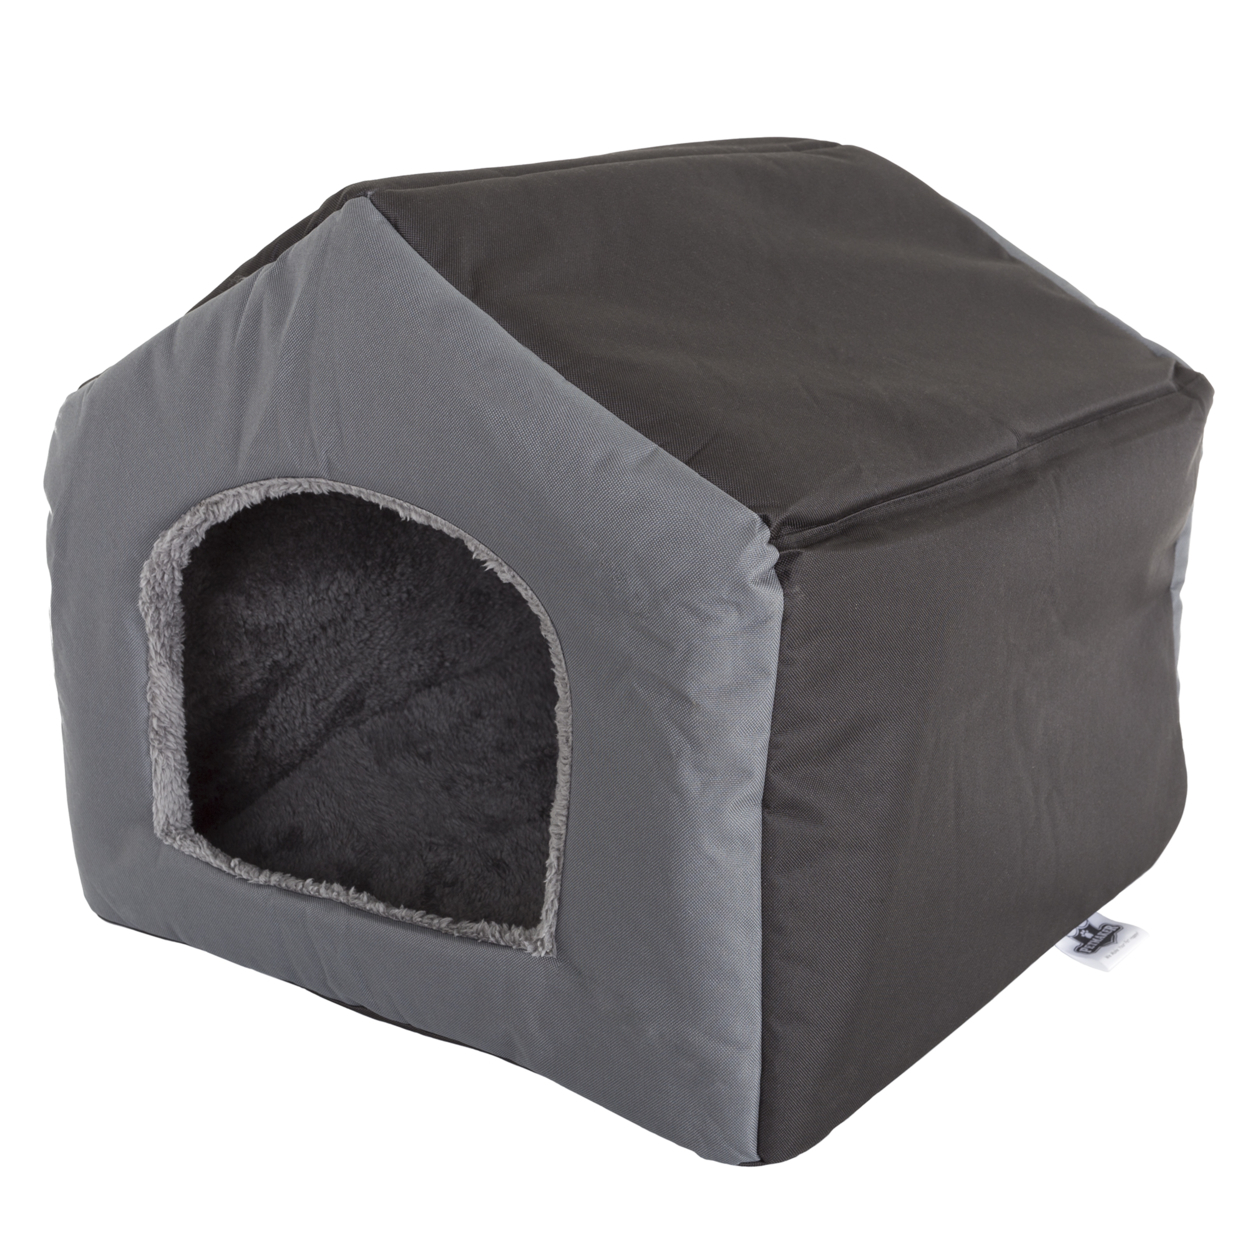 PETMAKER Cozy Cottage House Shaped Pet Bed Gray 19x18.5x17